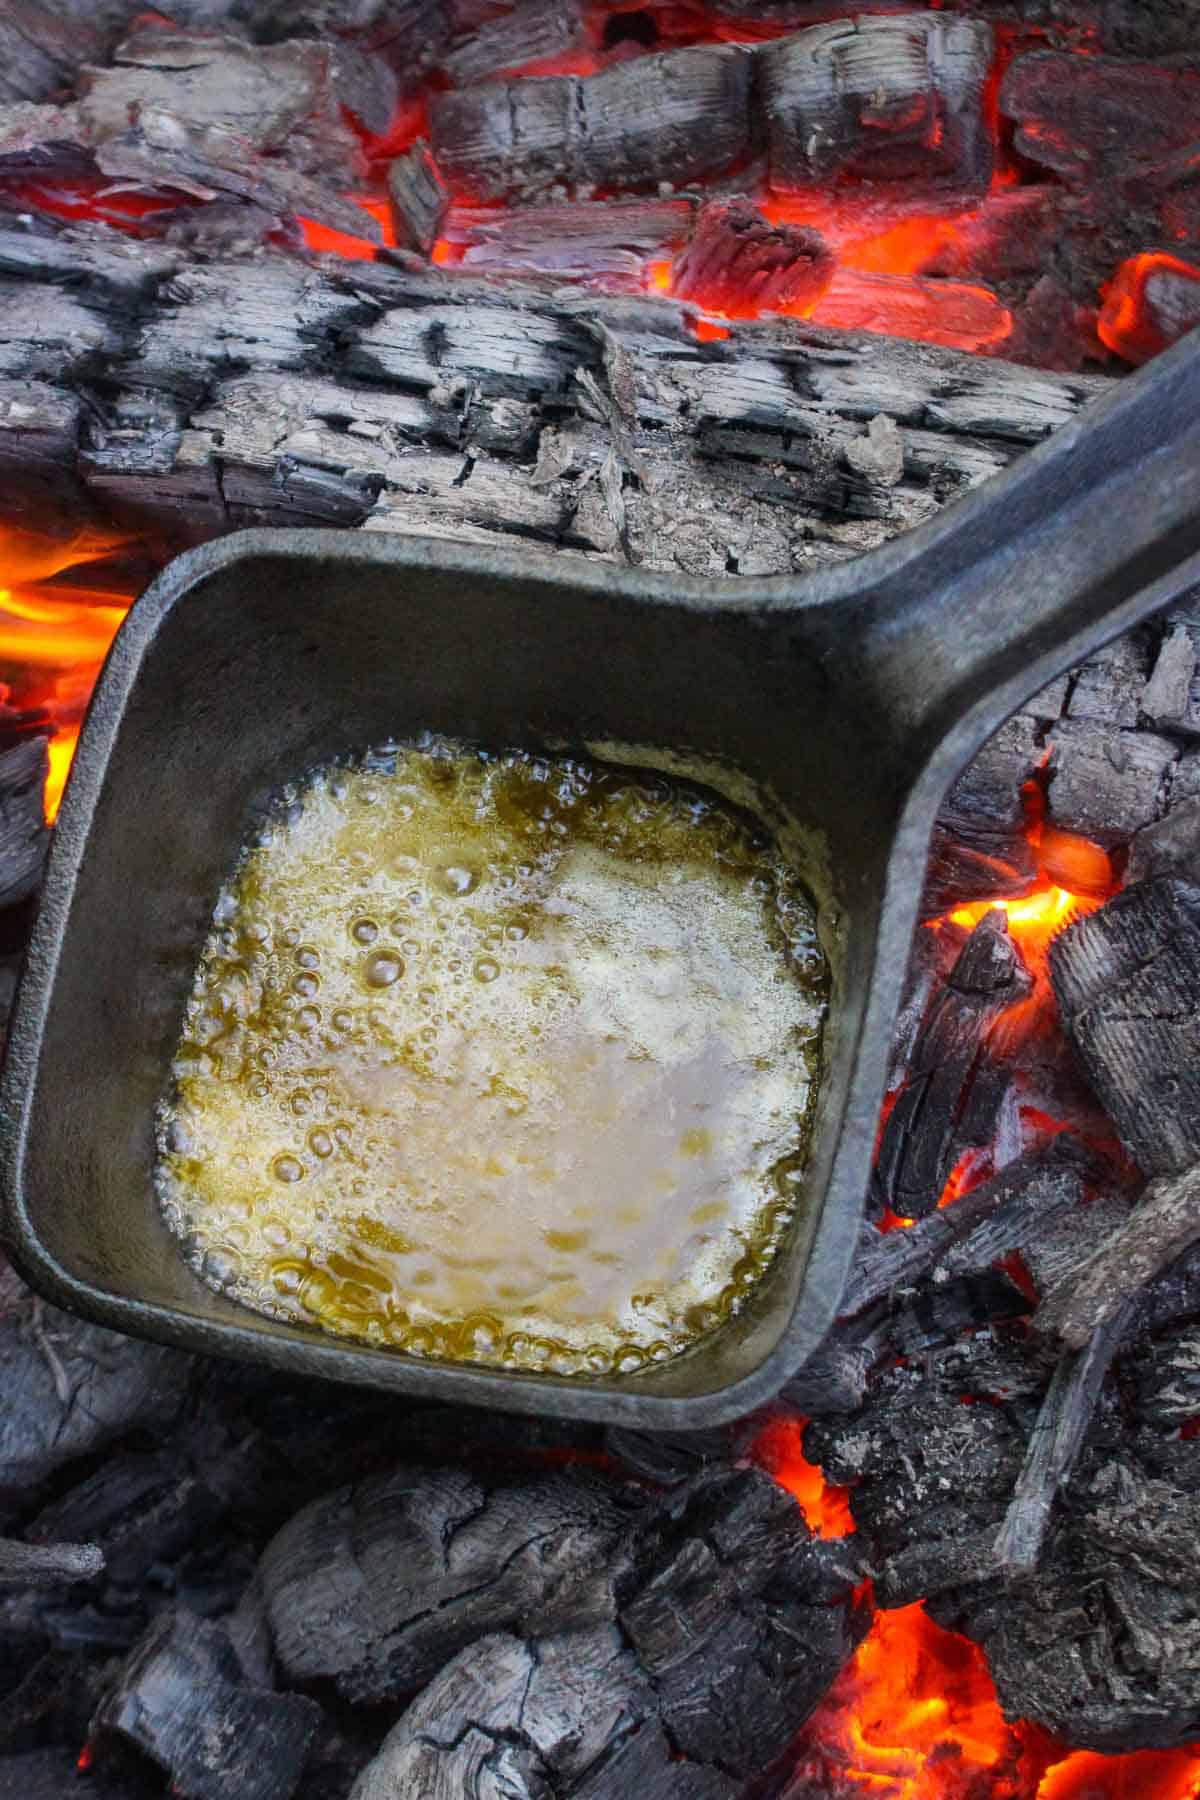 The butter sauce boiling while sitting the coals. 